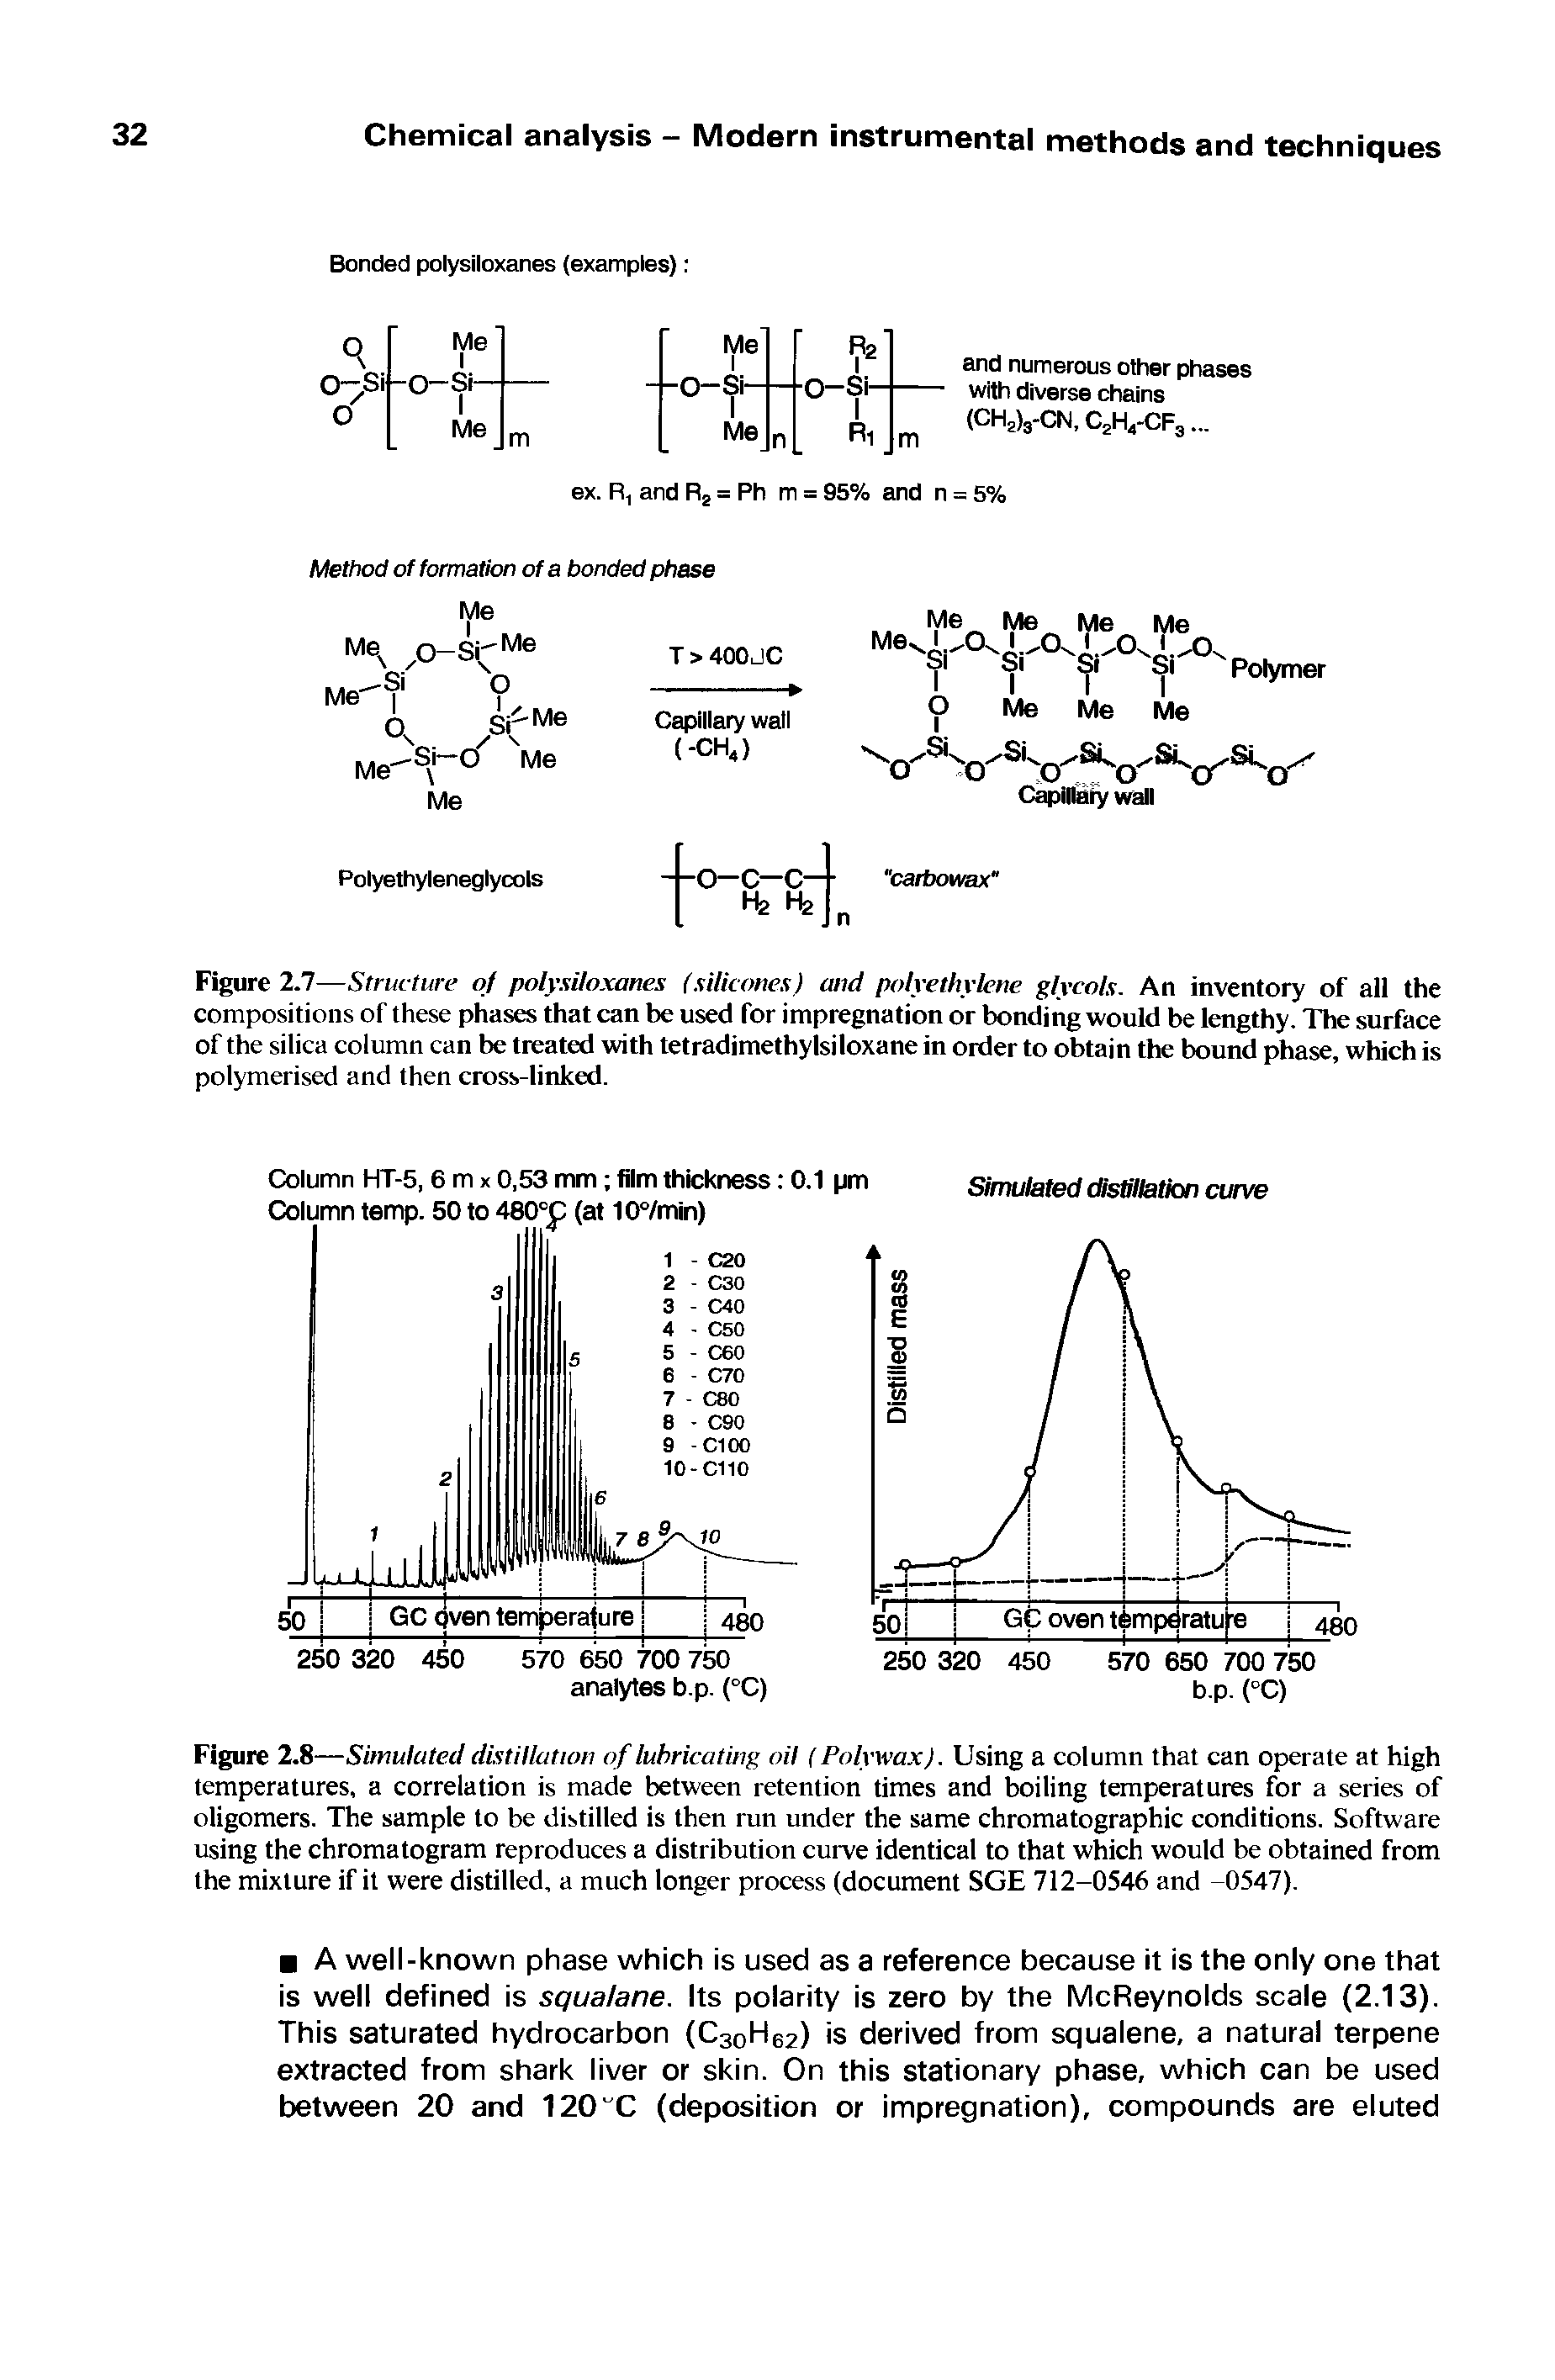 Figure 2.8—Simulated distillation of lubricating oil (Polvwax). Using a column that can operate at high temperatures, a correlation is made between retention times and boiling temperatures for a series of oligomers. The sample to be distilled is then run under the same chromatographic conditions. Software using the chromatogram reproduces a distribution curve identical to that which would be obtained from the mixture if it were distilled, a much longer process (document SGE 712-0546 and -0547).